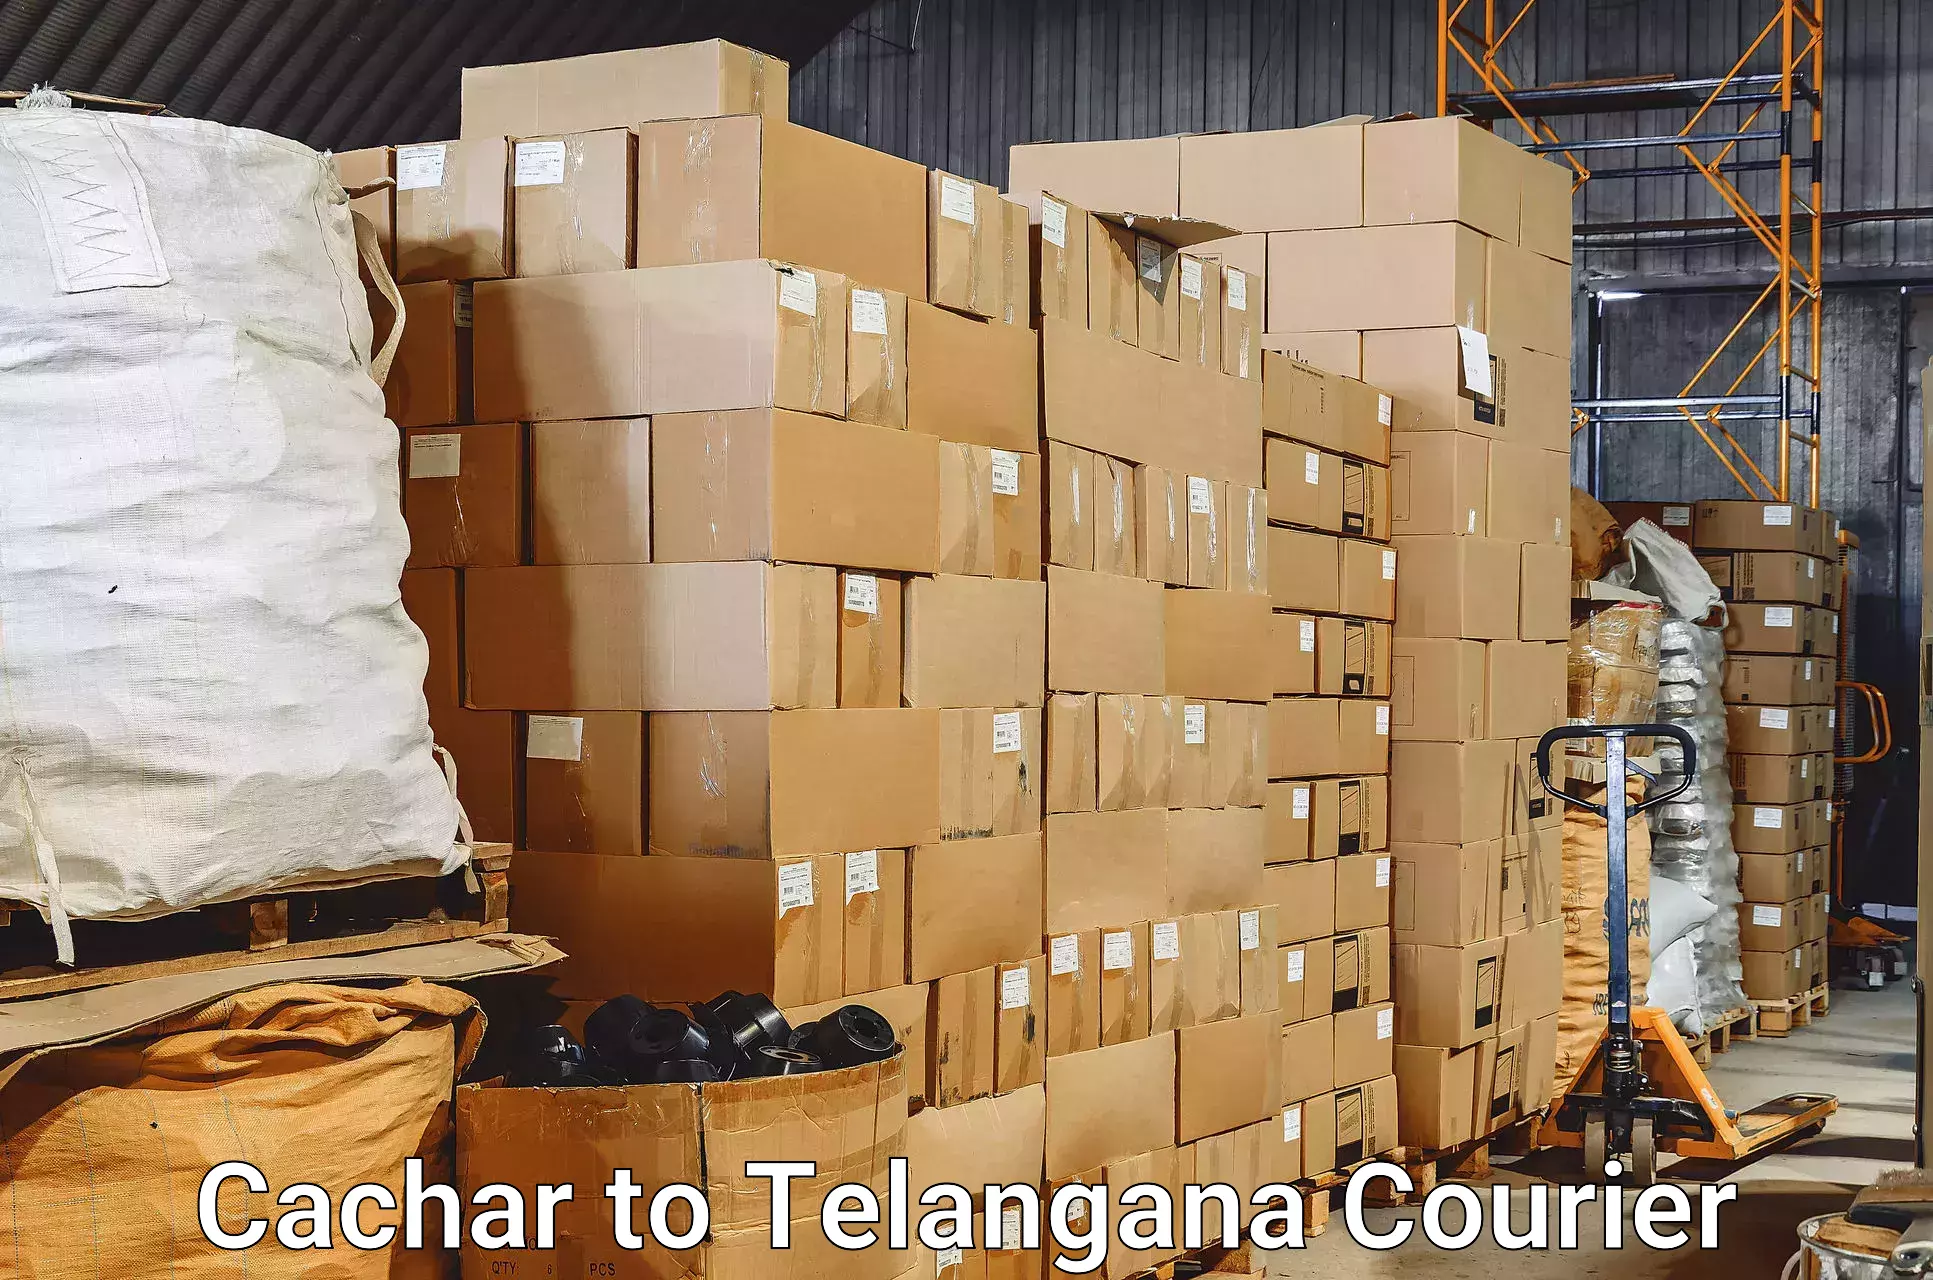 Baggage transport innovation Cachar to Cherial